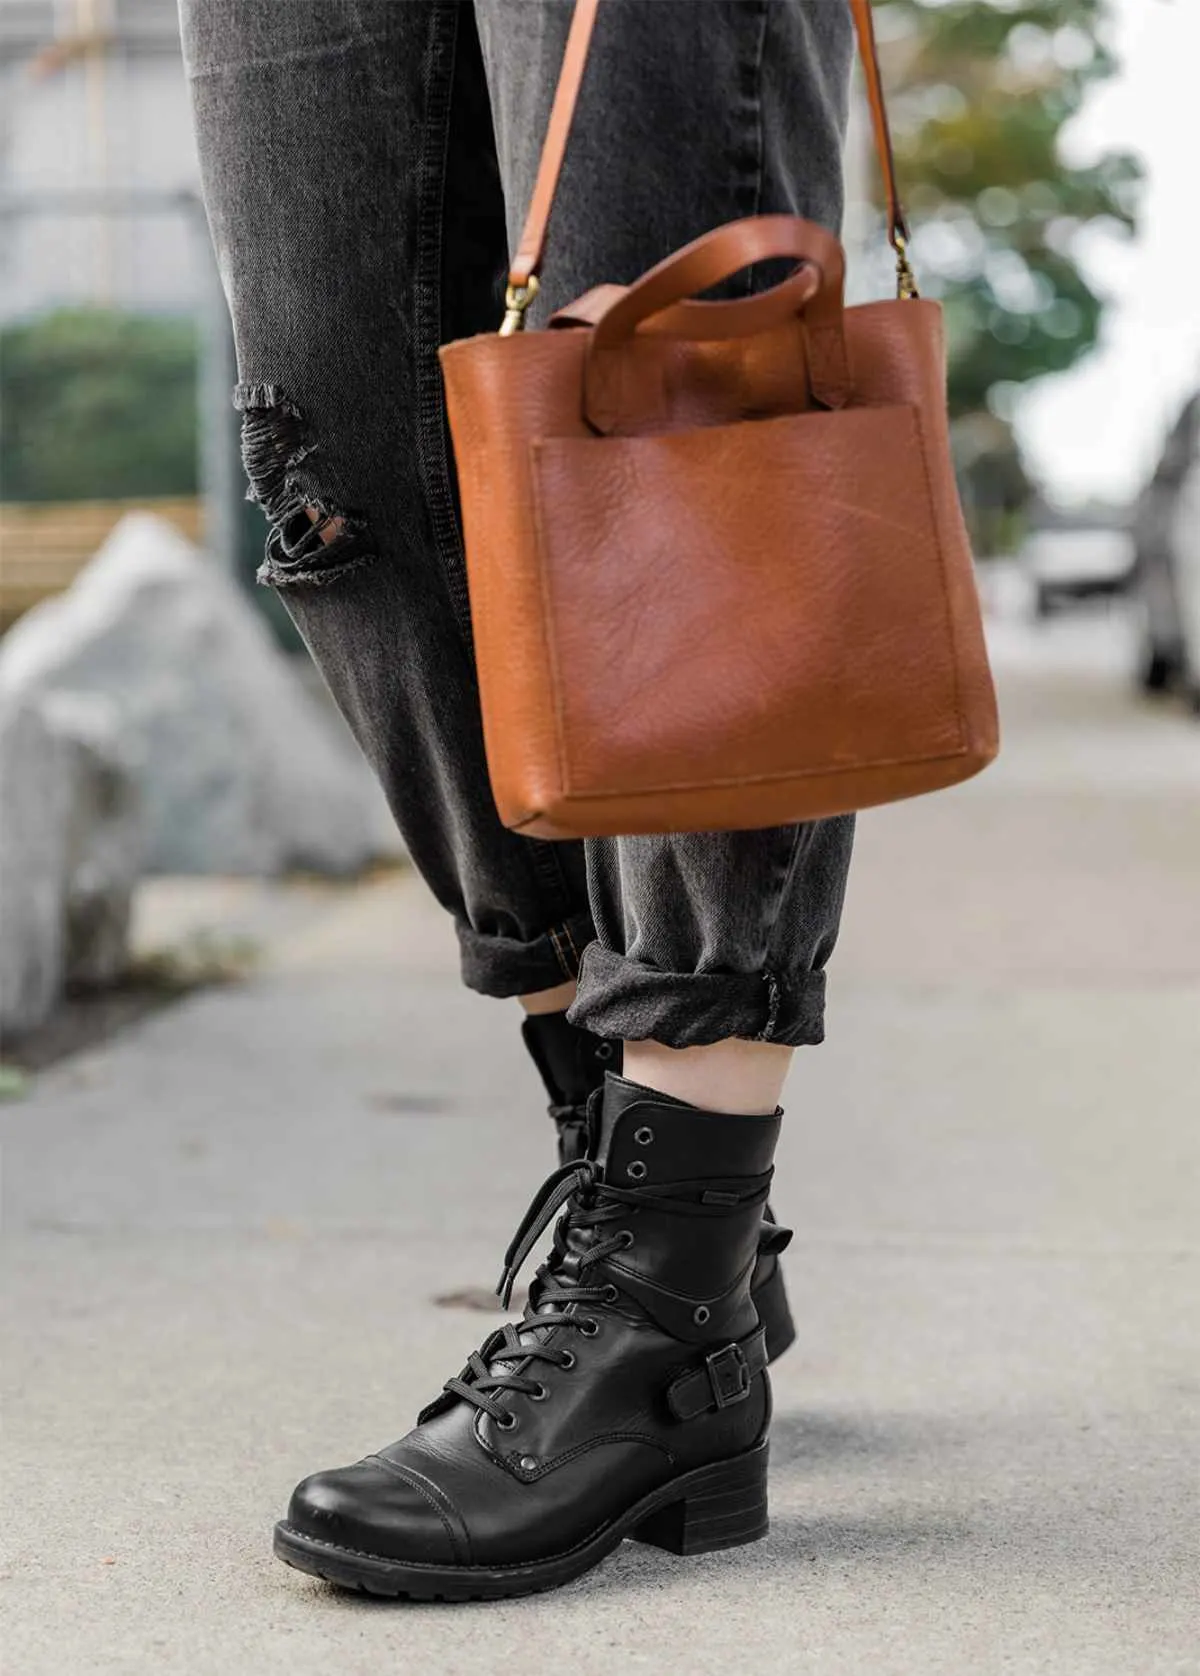 Cropped view of woman's legs wearing Taos crave combat boots in black waterproof with cuffed grey ripped jeans and a brown leather purse on a sidewalk.